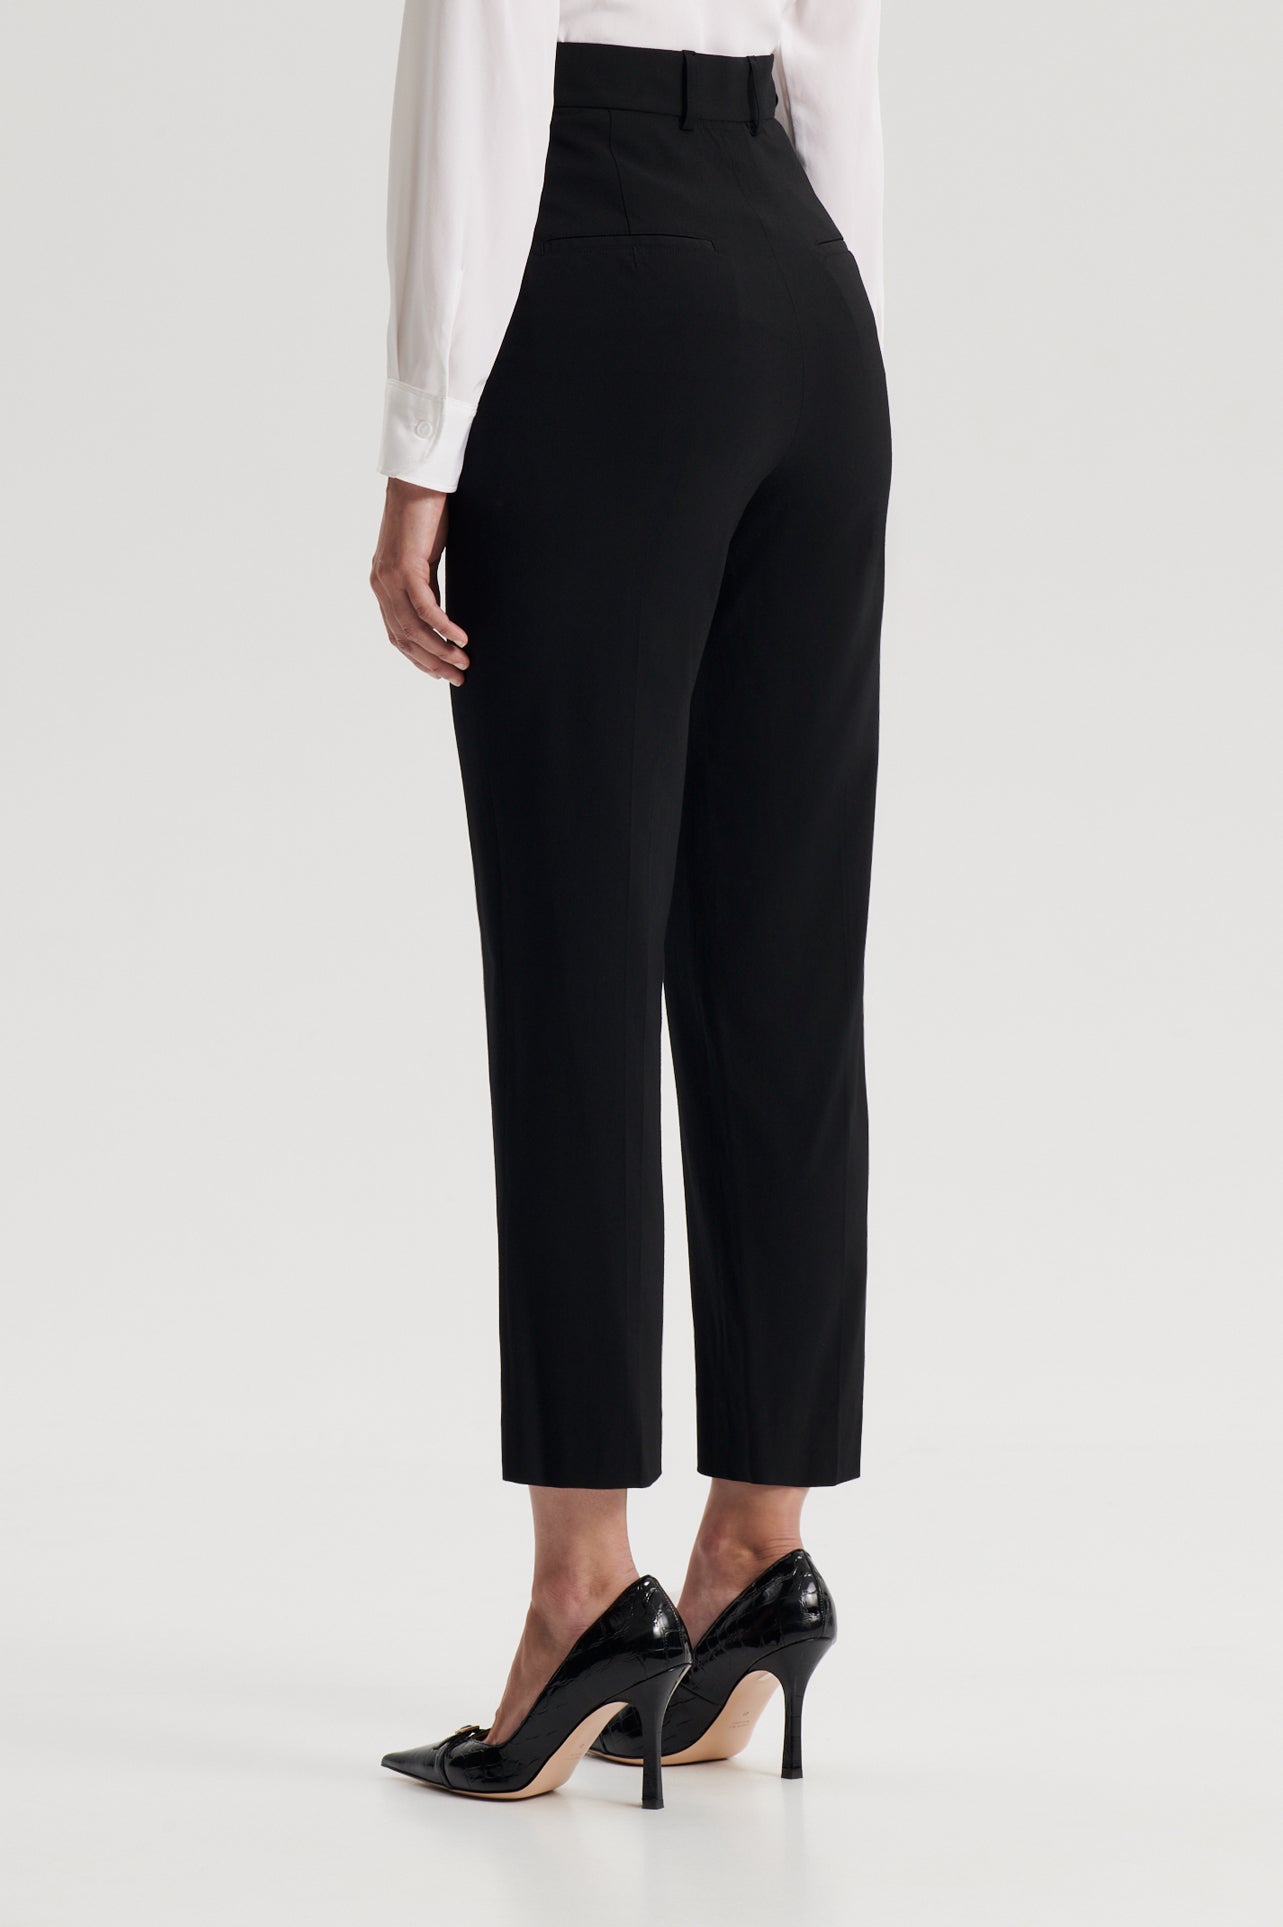 https://cdn.shopify.com/s/files/1/1899/4143/products/H1221324G-TAILORED-CROPPED-TROUSER-BLACK-SCANLANTHEODORE-5_b9eff202-5f2a-46ed-92e8-5395a8bc14bf.jpg?v=1707919734